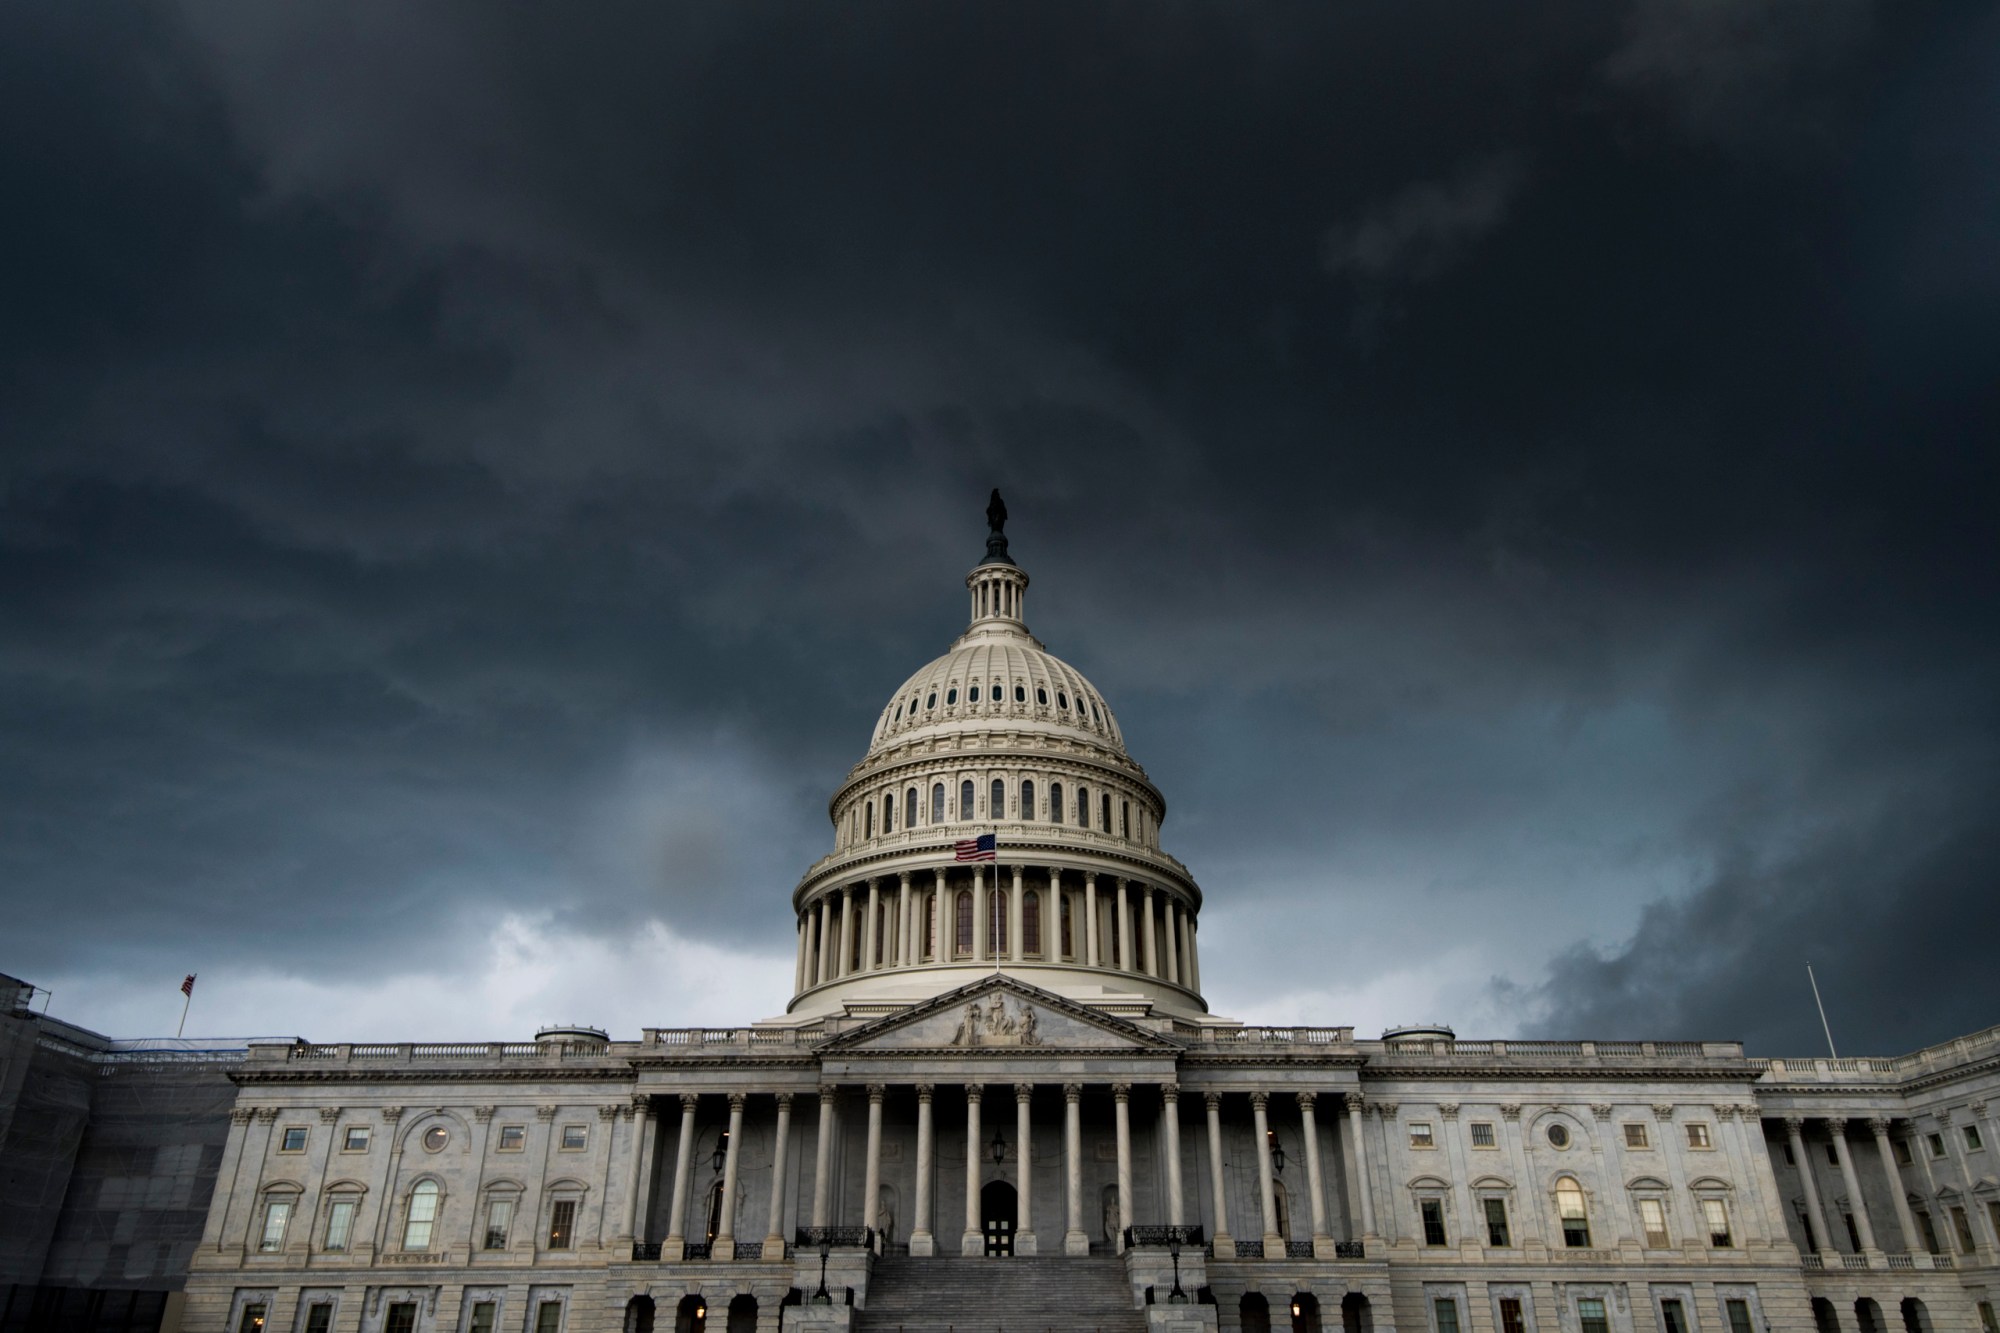 A thunderstorm passes over the U.S. Capitol, July 2019. (Getty/Bill Clark)